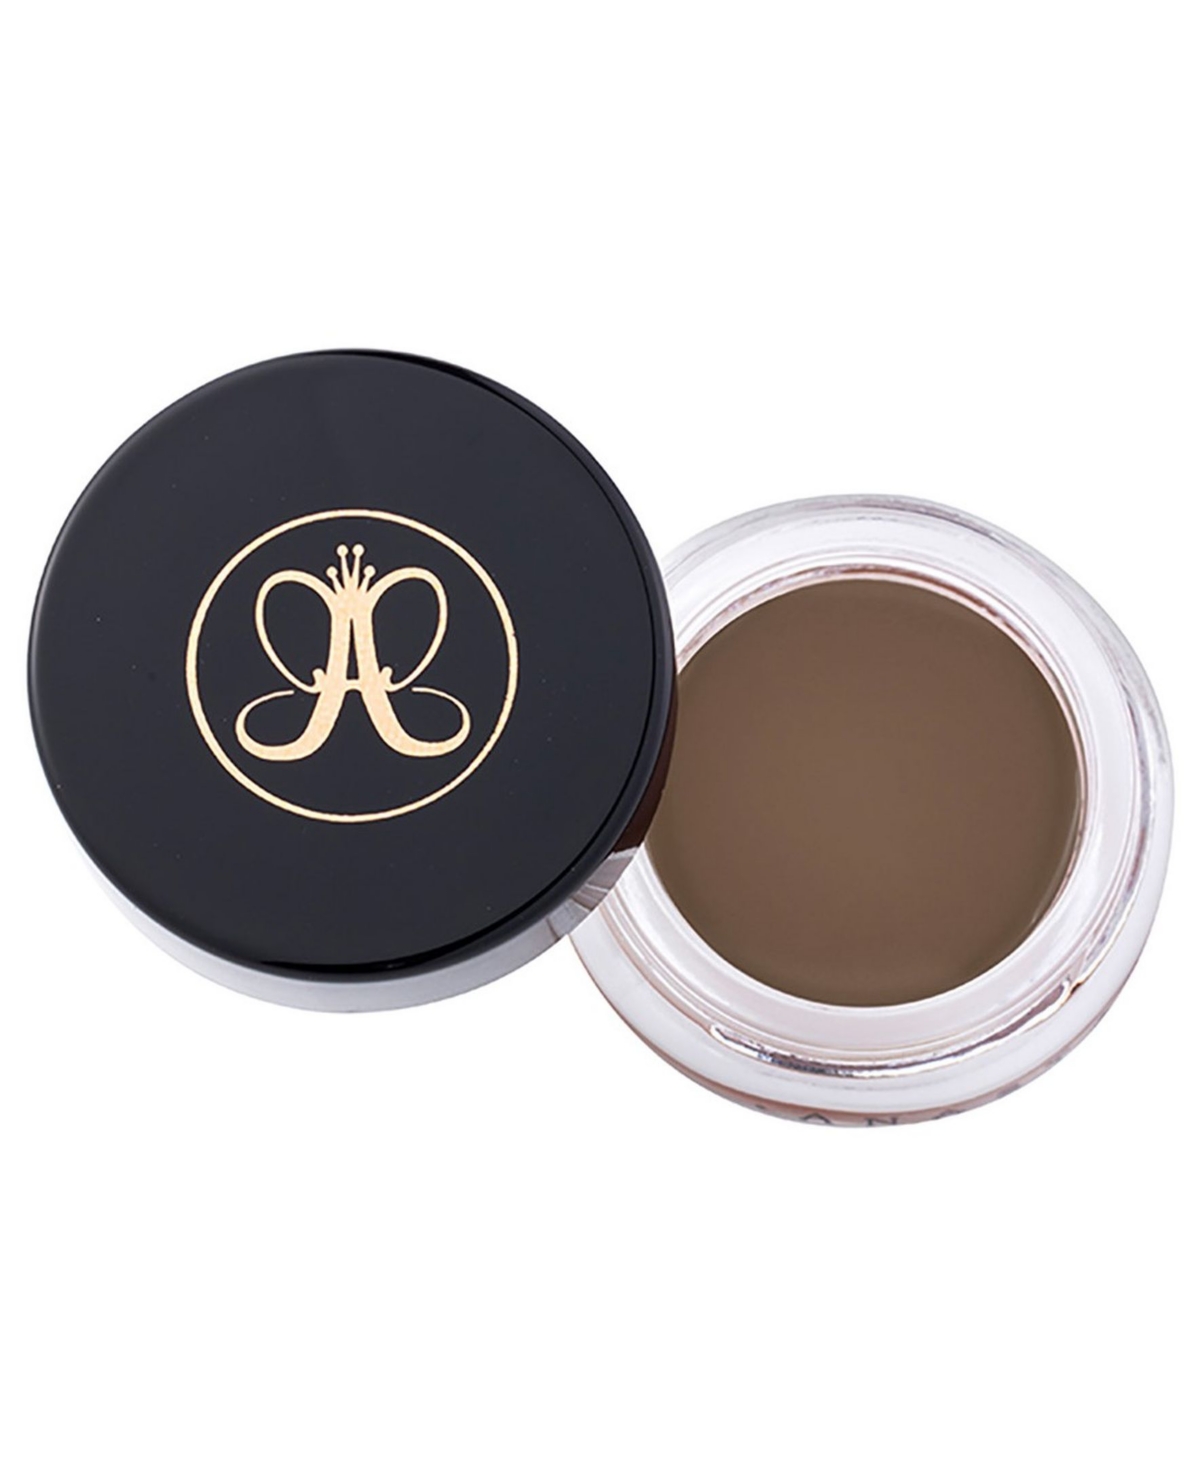 Anastasia Beverly Hills Dipbrow Pomade In Soft Brown (light Brown Hair With Warm,c